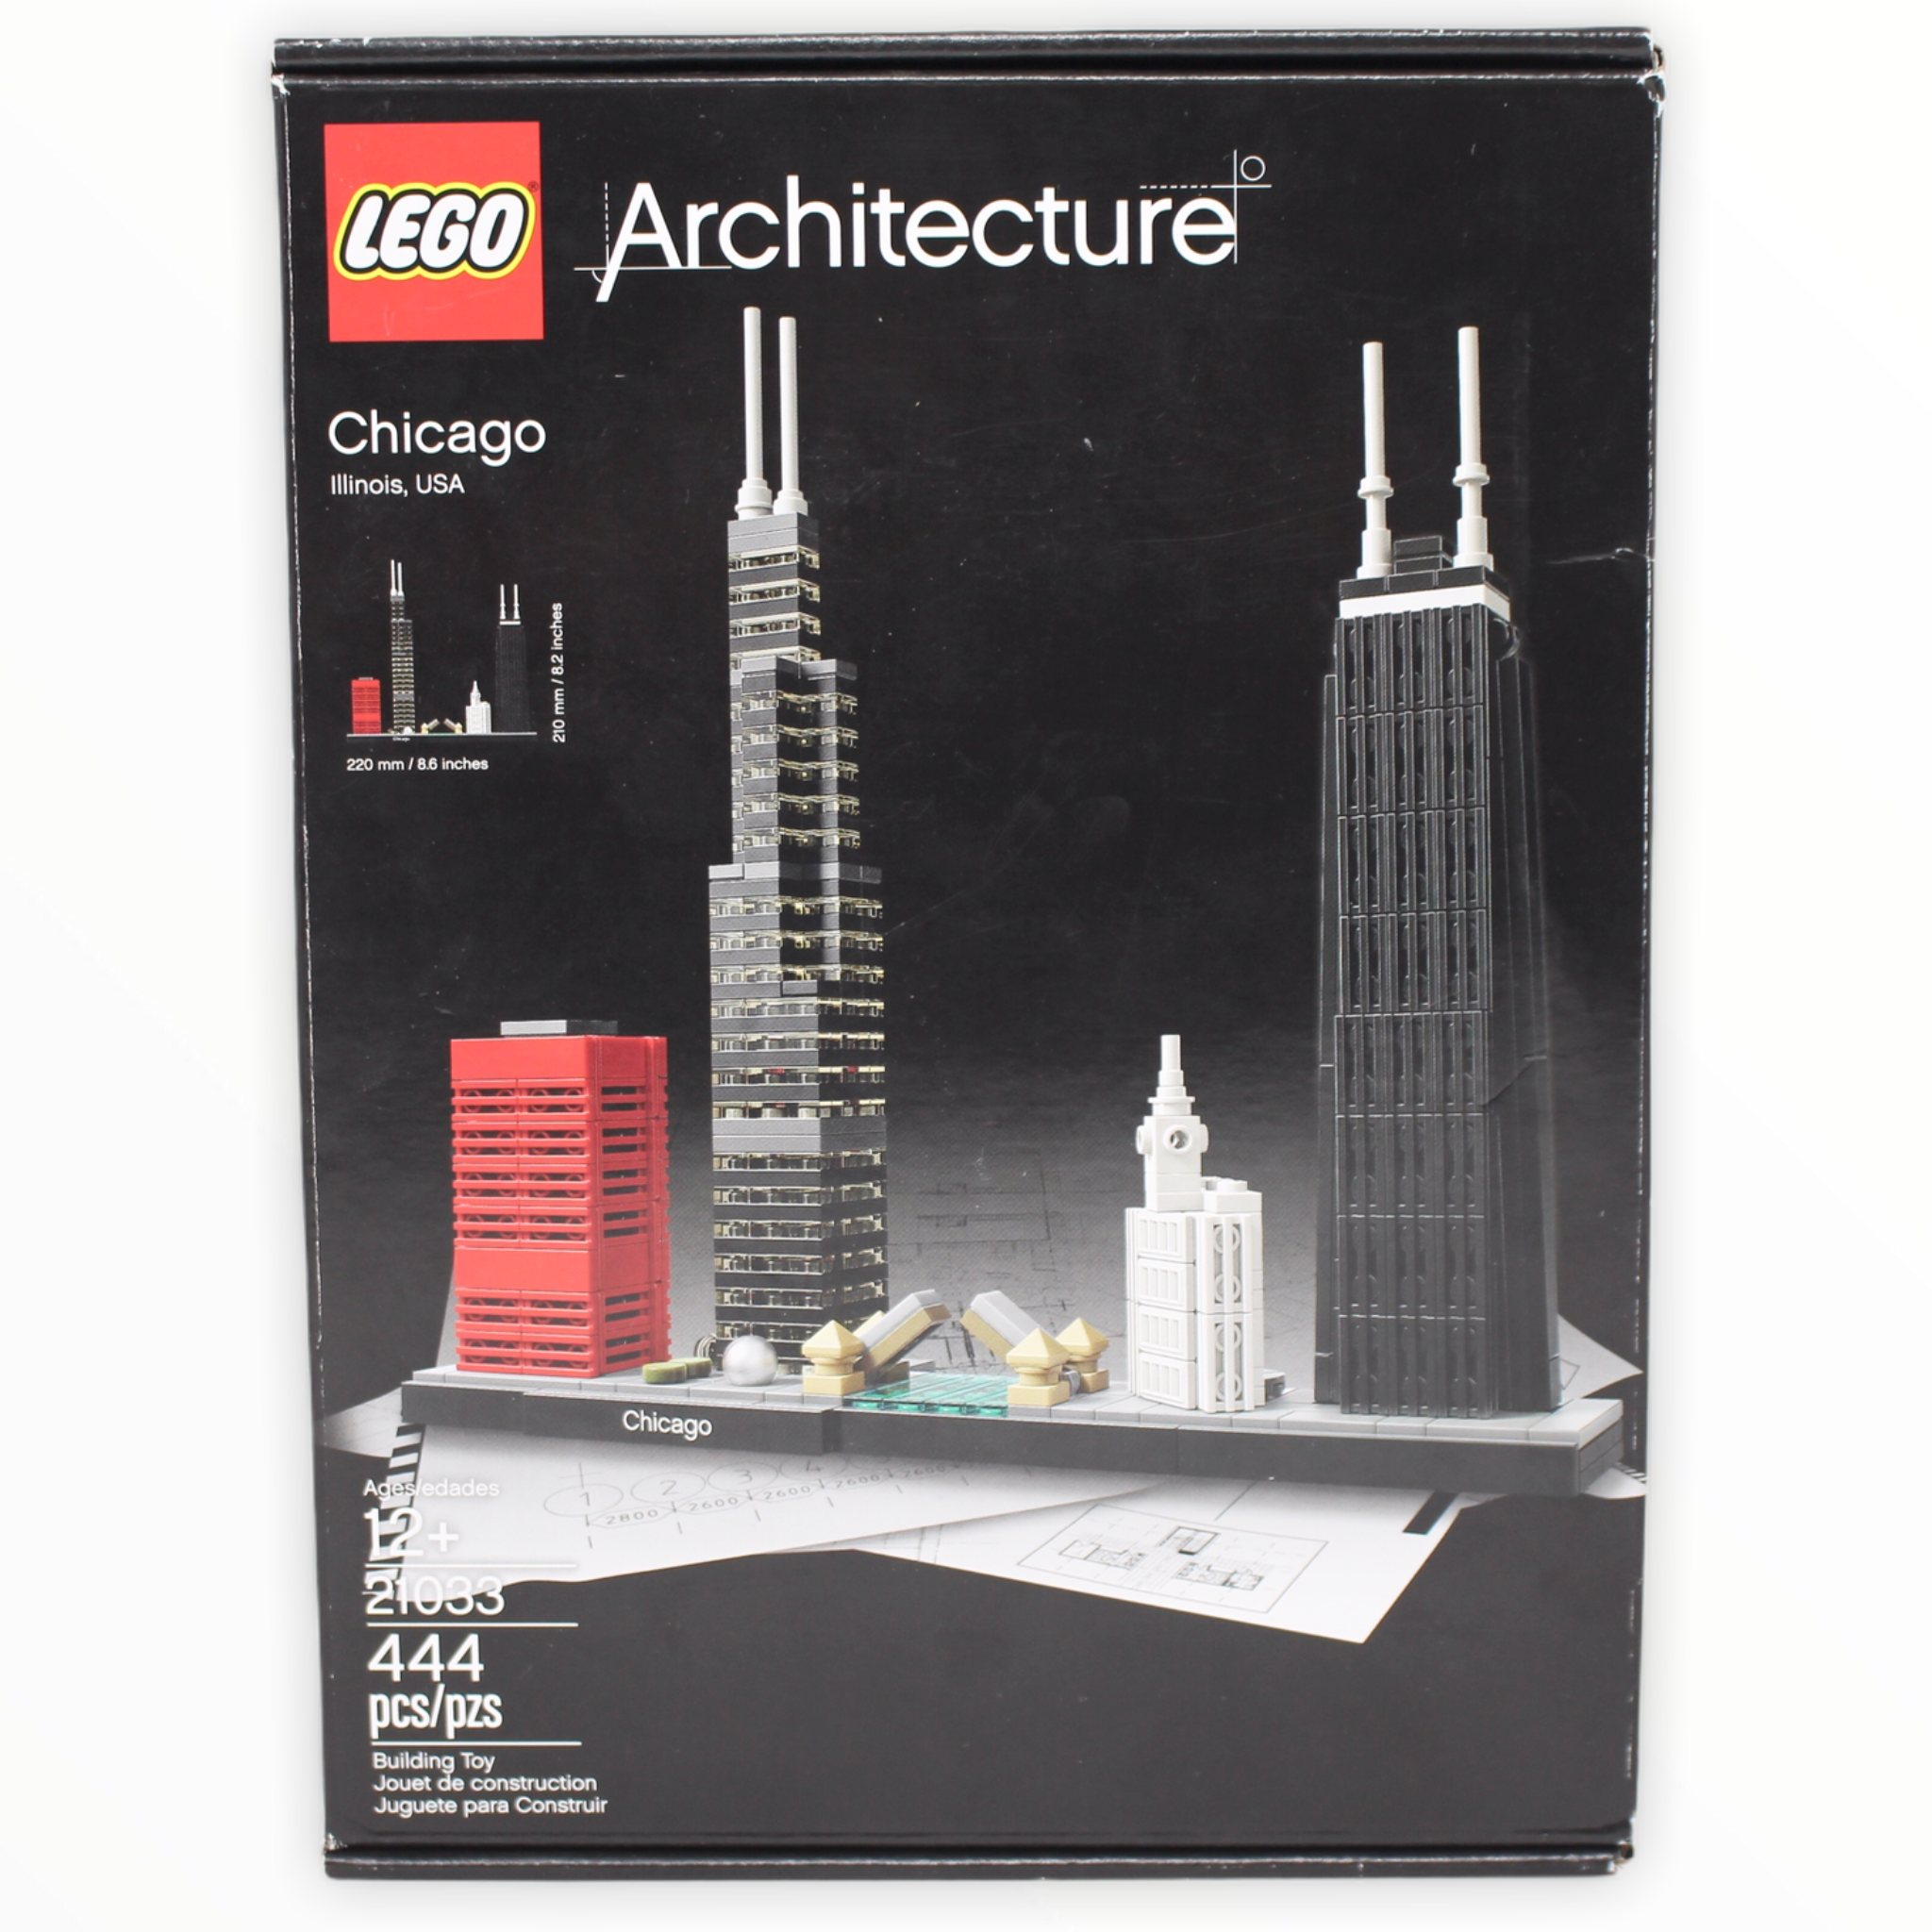 Certified Used Set 21033 Architecture Chicago